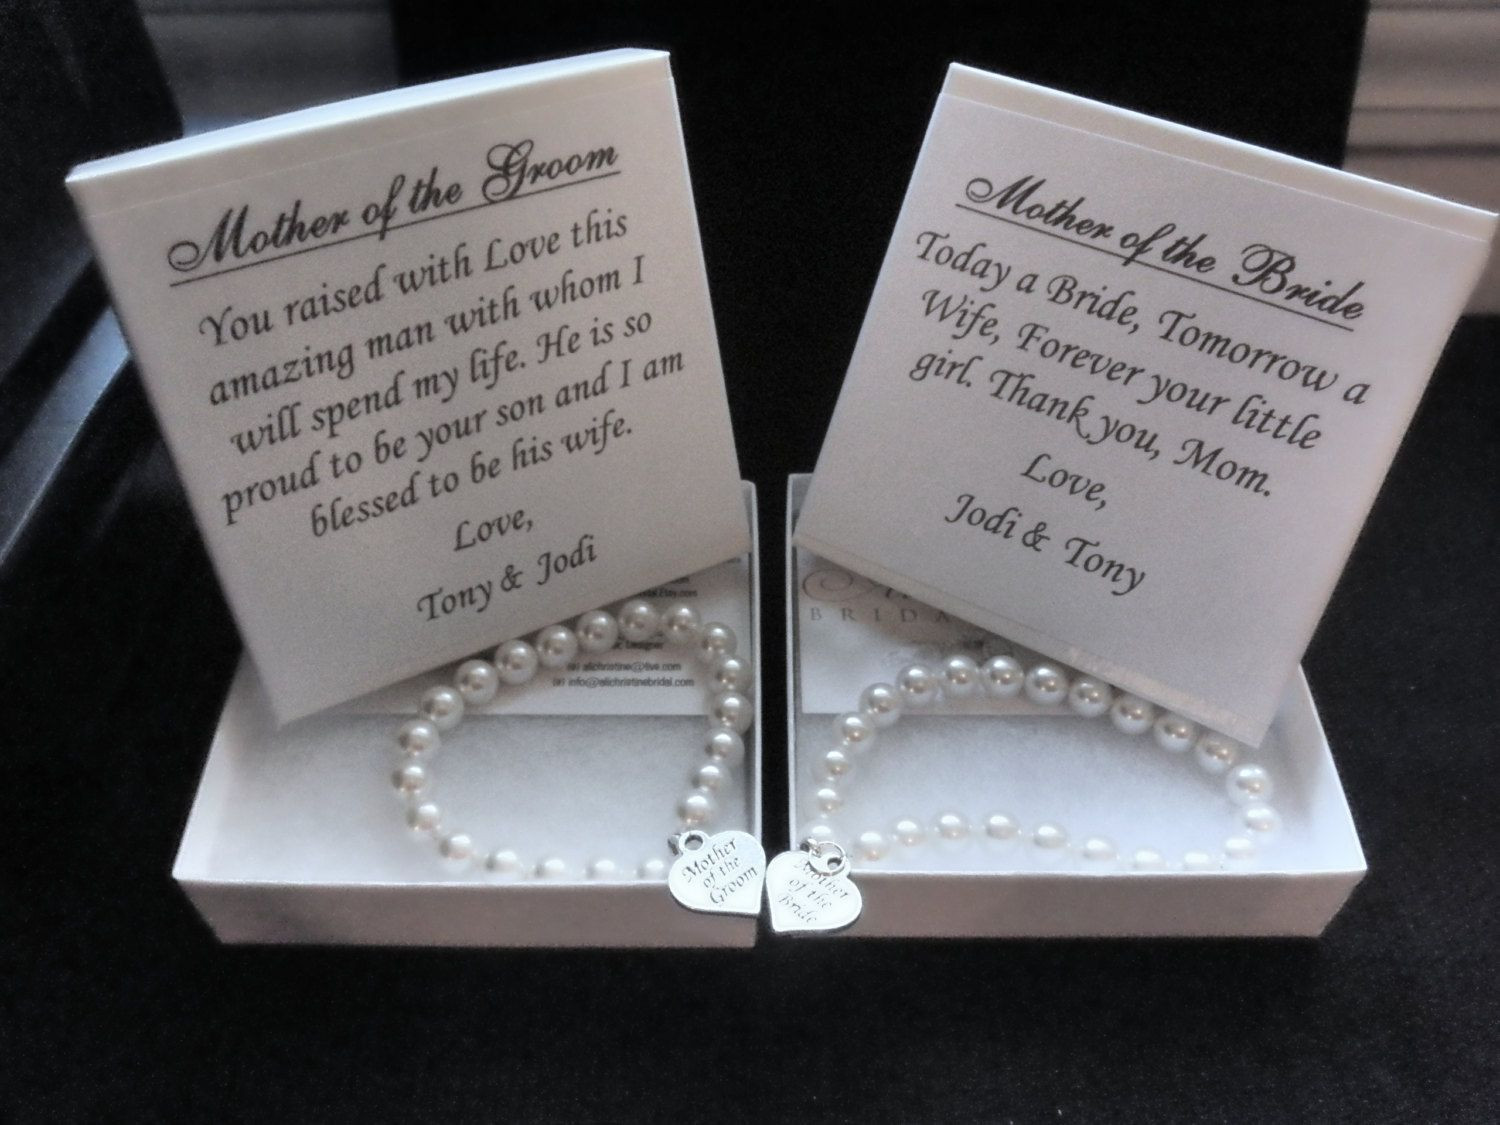 Mother Of The Groom Gift Ideas From Bride
 Mother of the Bride Pearl Bracelet Gift Set Mother of the